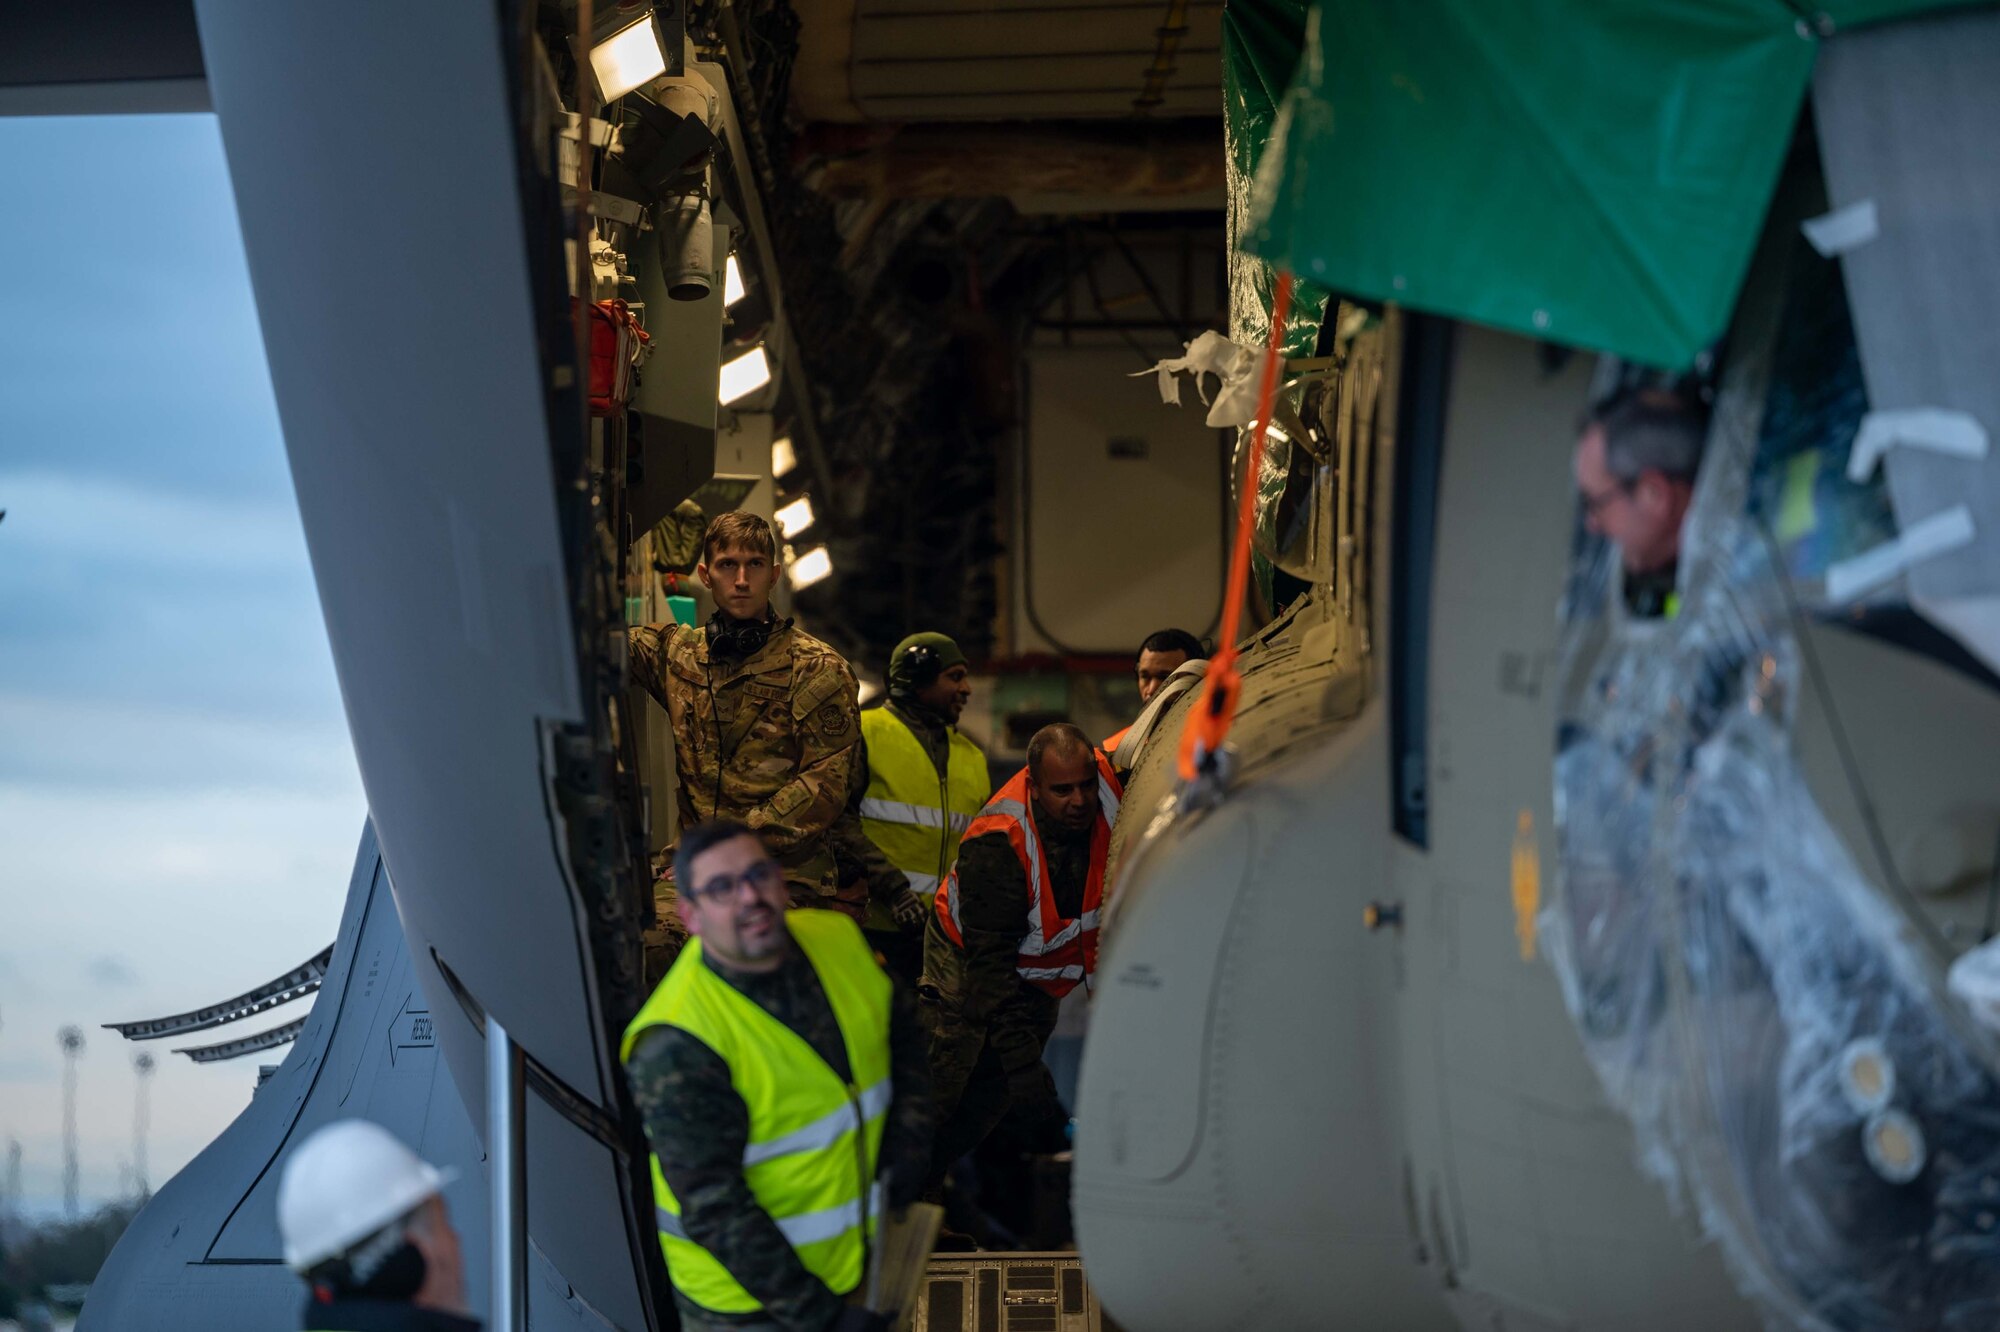 Senior Airman Matthew Warren, 3rd Airlift Squadron loadmaster, controls the wench system while unloading a CH-47F Chinook helicopter from a C-17 Globemaster III assigned to Dover Air Force Base, Delaware, during a foreign military sales mission at Torrejón Air Base, Spain, Jan. 16, 2023. The United States and Spain recognize the central importance of the NATO alliance in ensuring transatlantic peace and security. As NATO Allies for 40 years, the U.S. and Spain are steadfastly committed to providing NATO with ready forces and capabilities, strengthening transatlantic ties. (U.S. Air Force photo by Senior Airman Faith Barron)